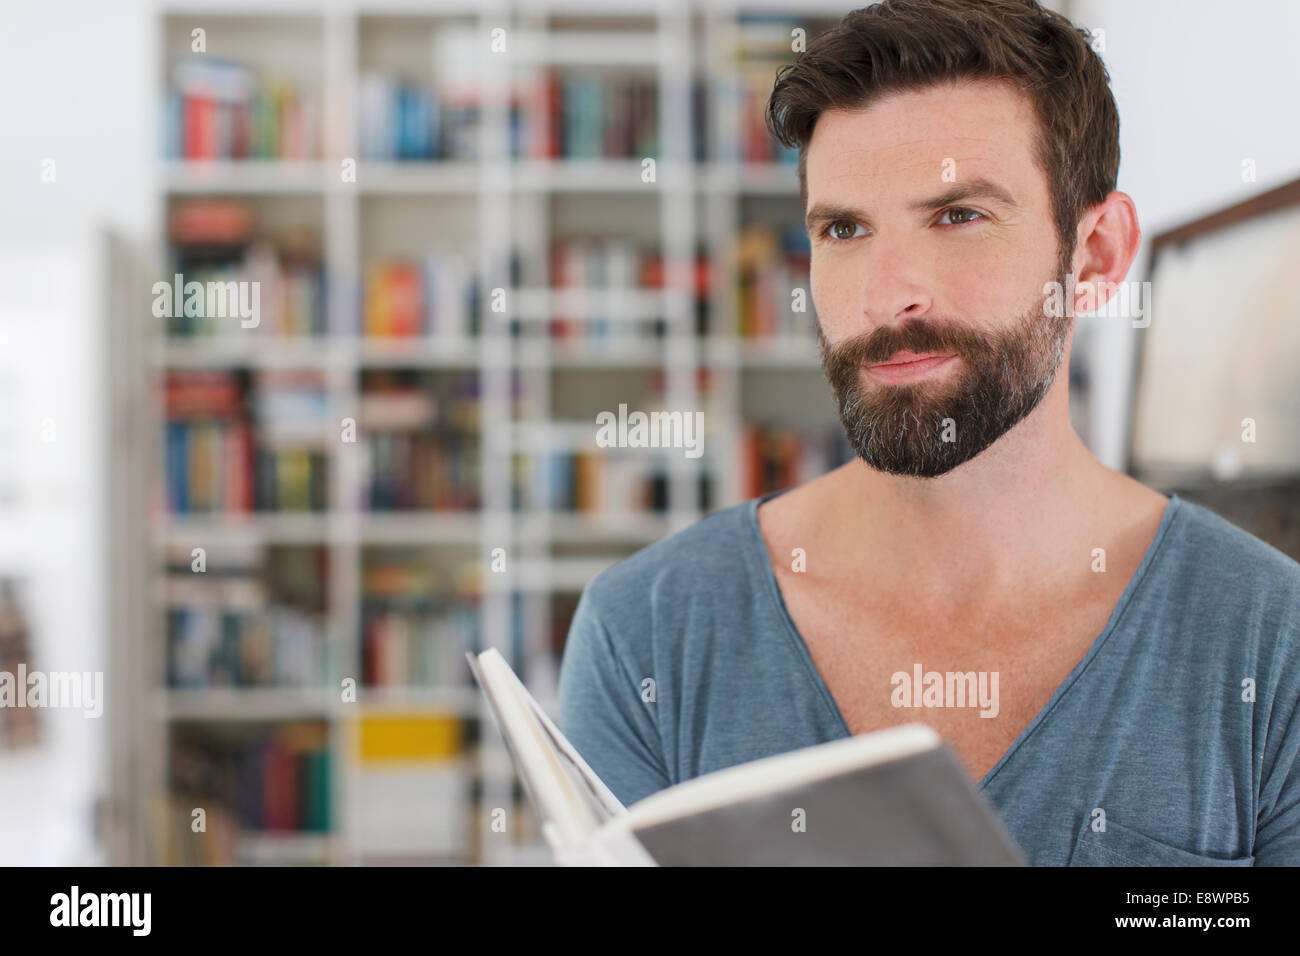 Man reading book in living room Stock Photo